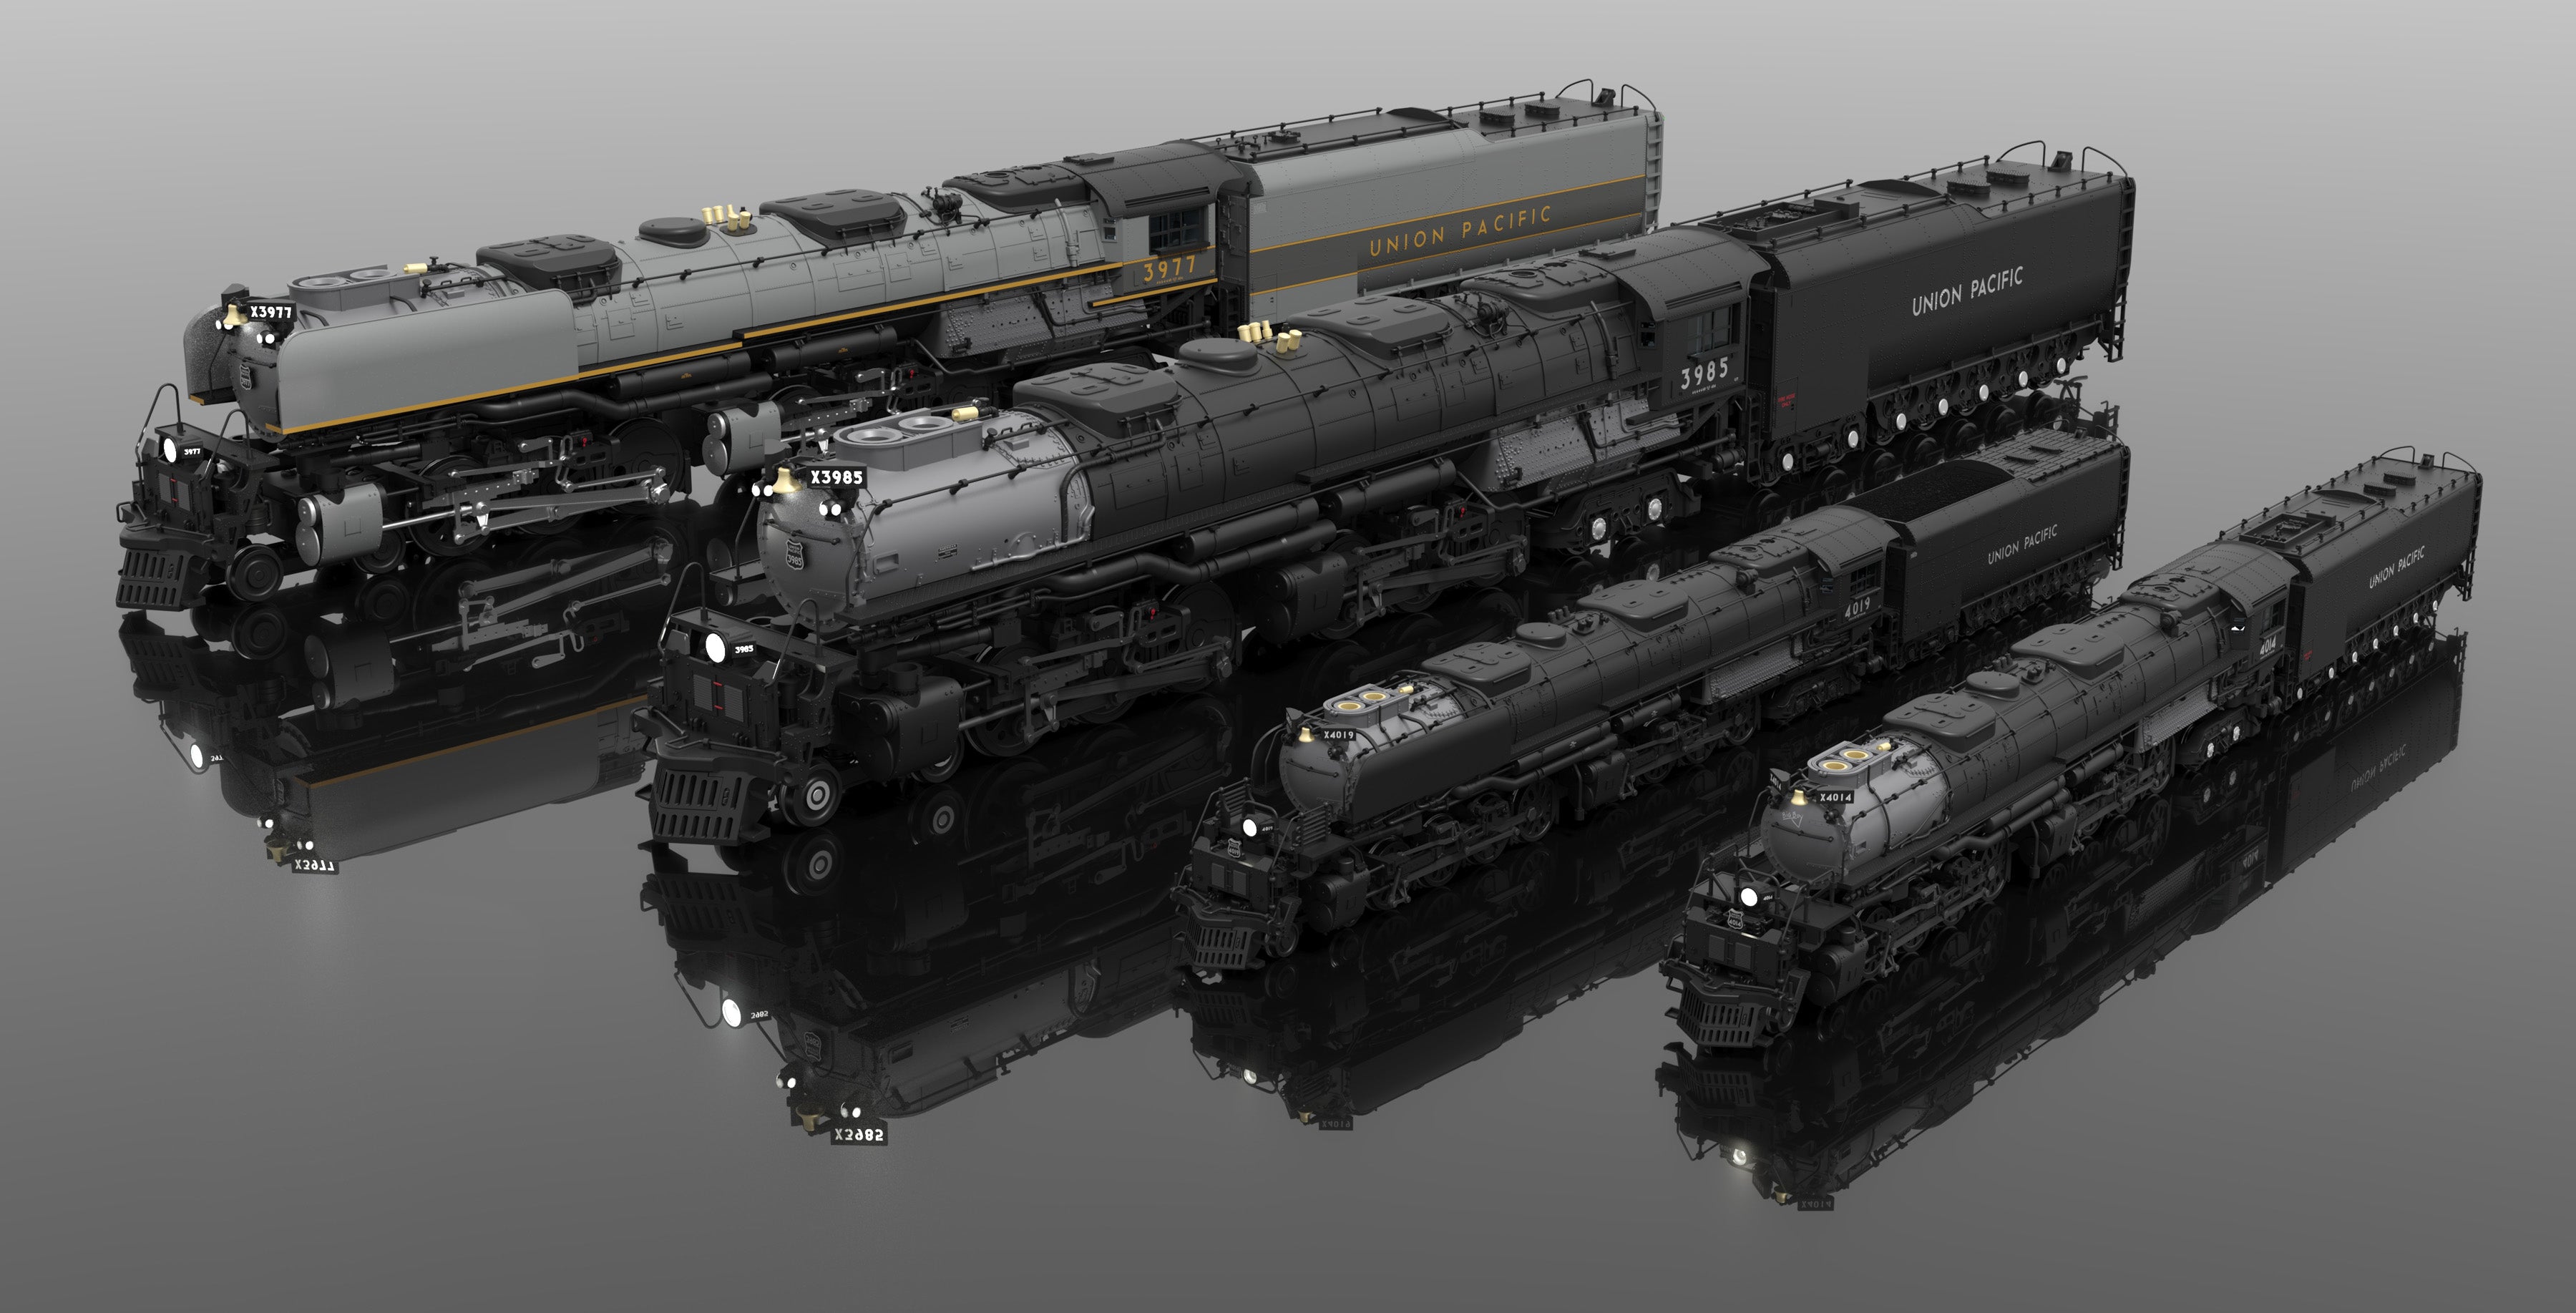 Conductor's Club locomotives are coming this year!